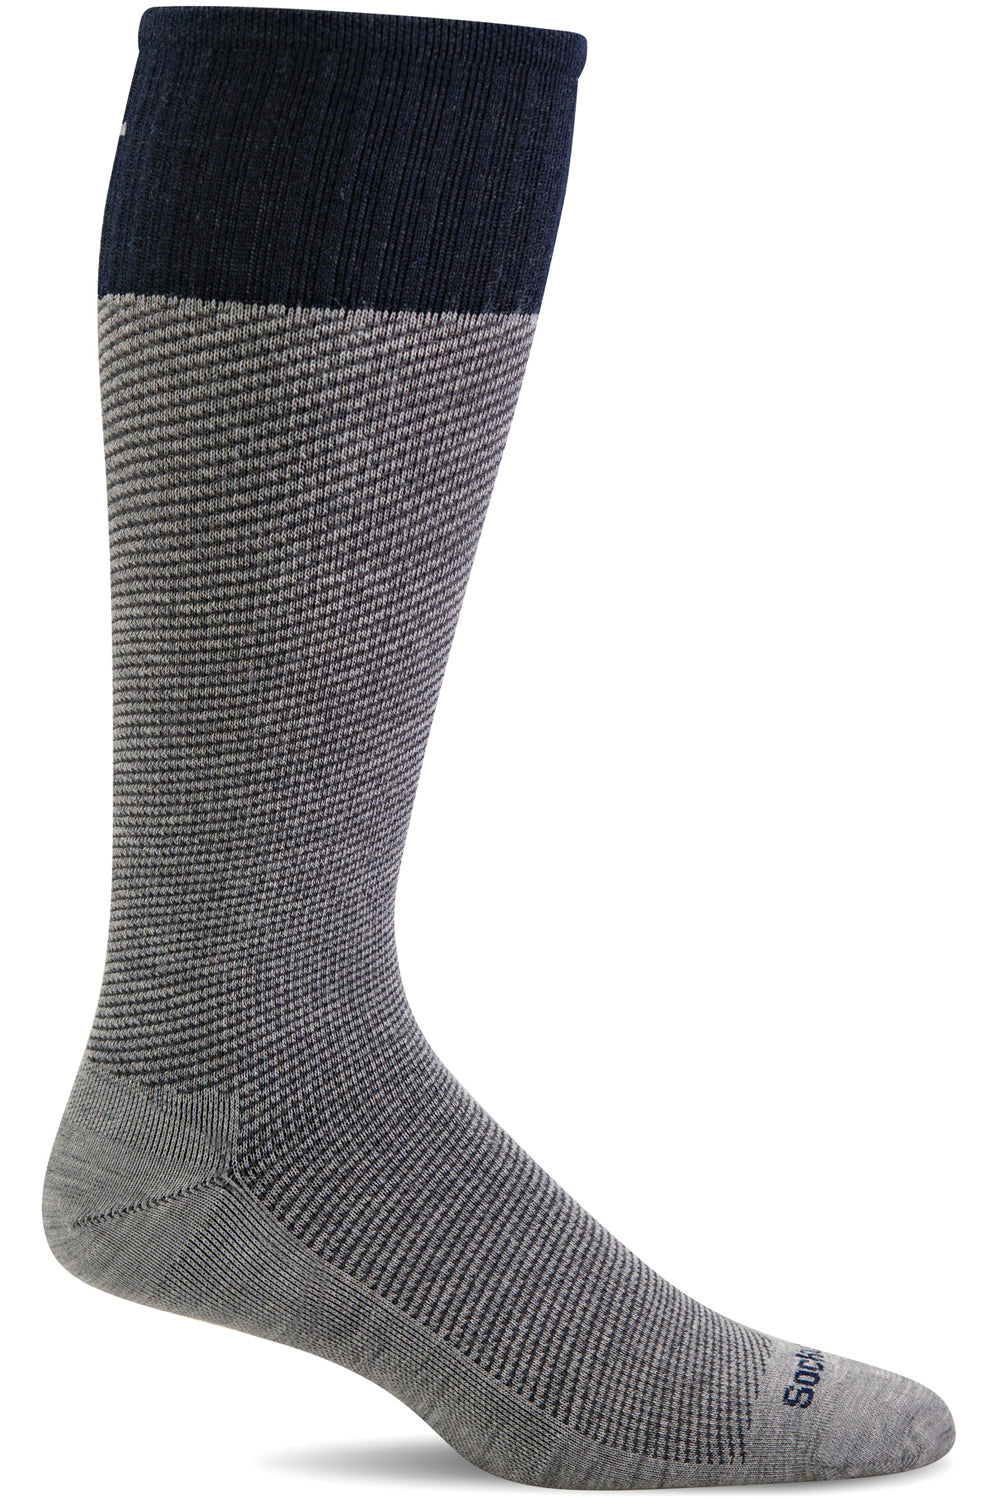 Sockwell Men's Bart Compression Sock in Grey color from the side